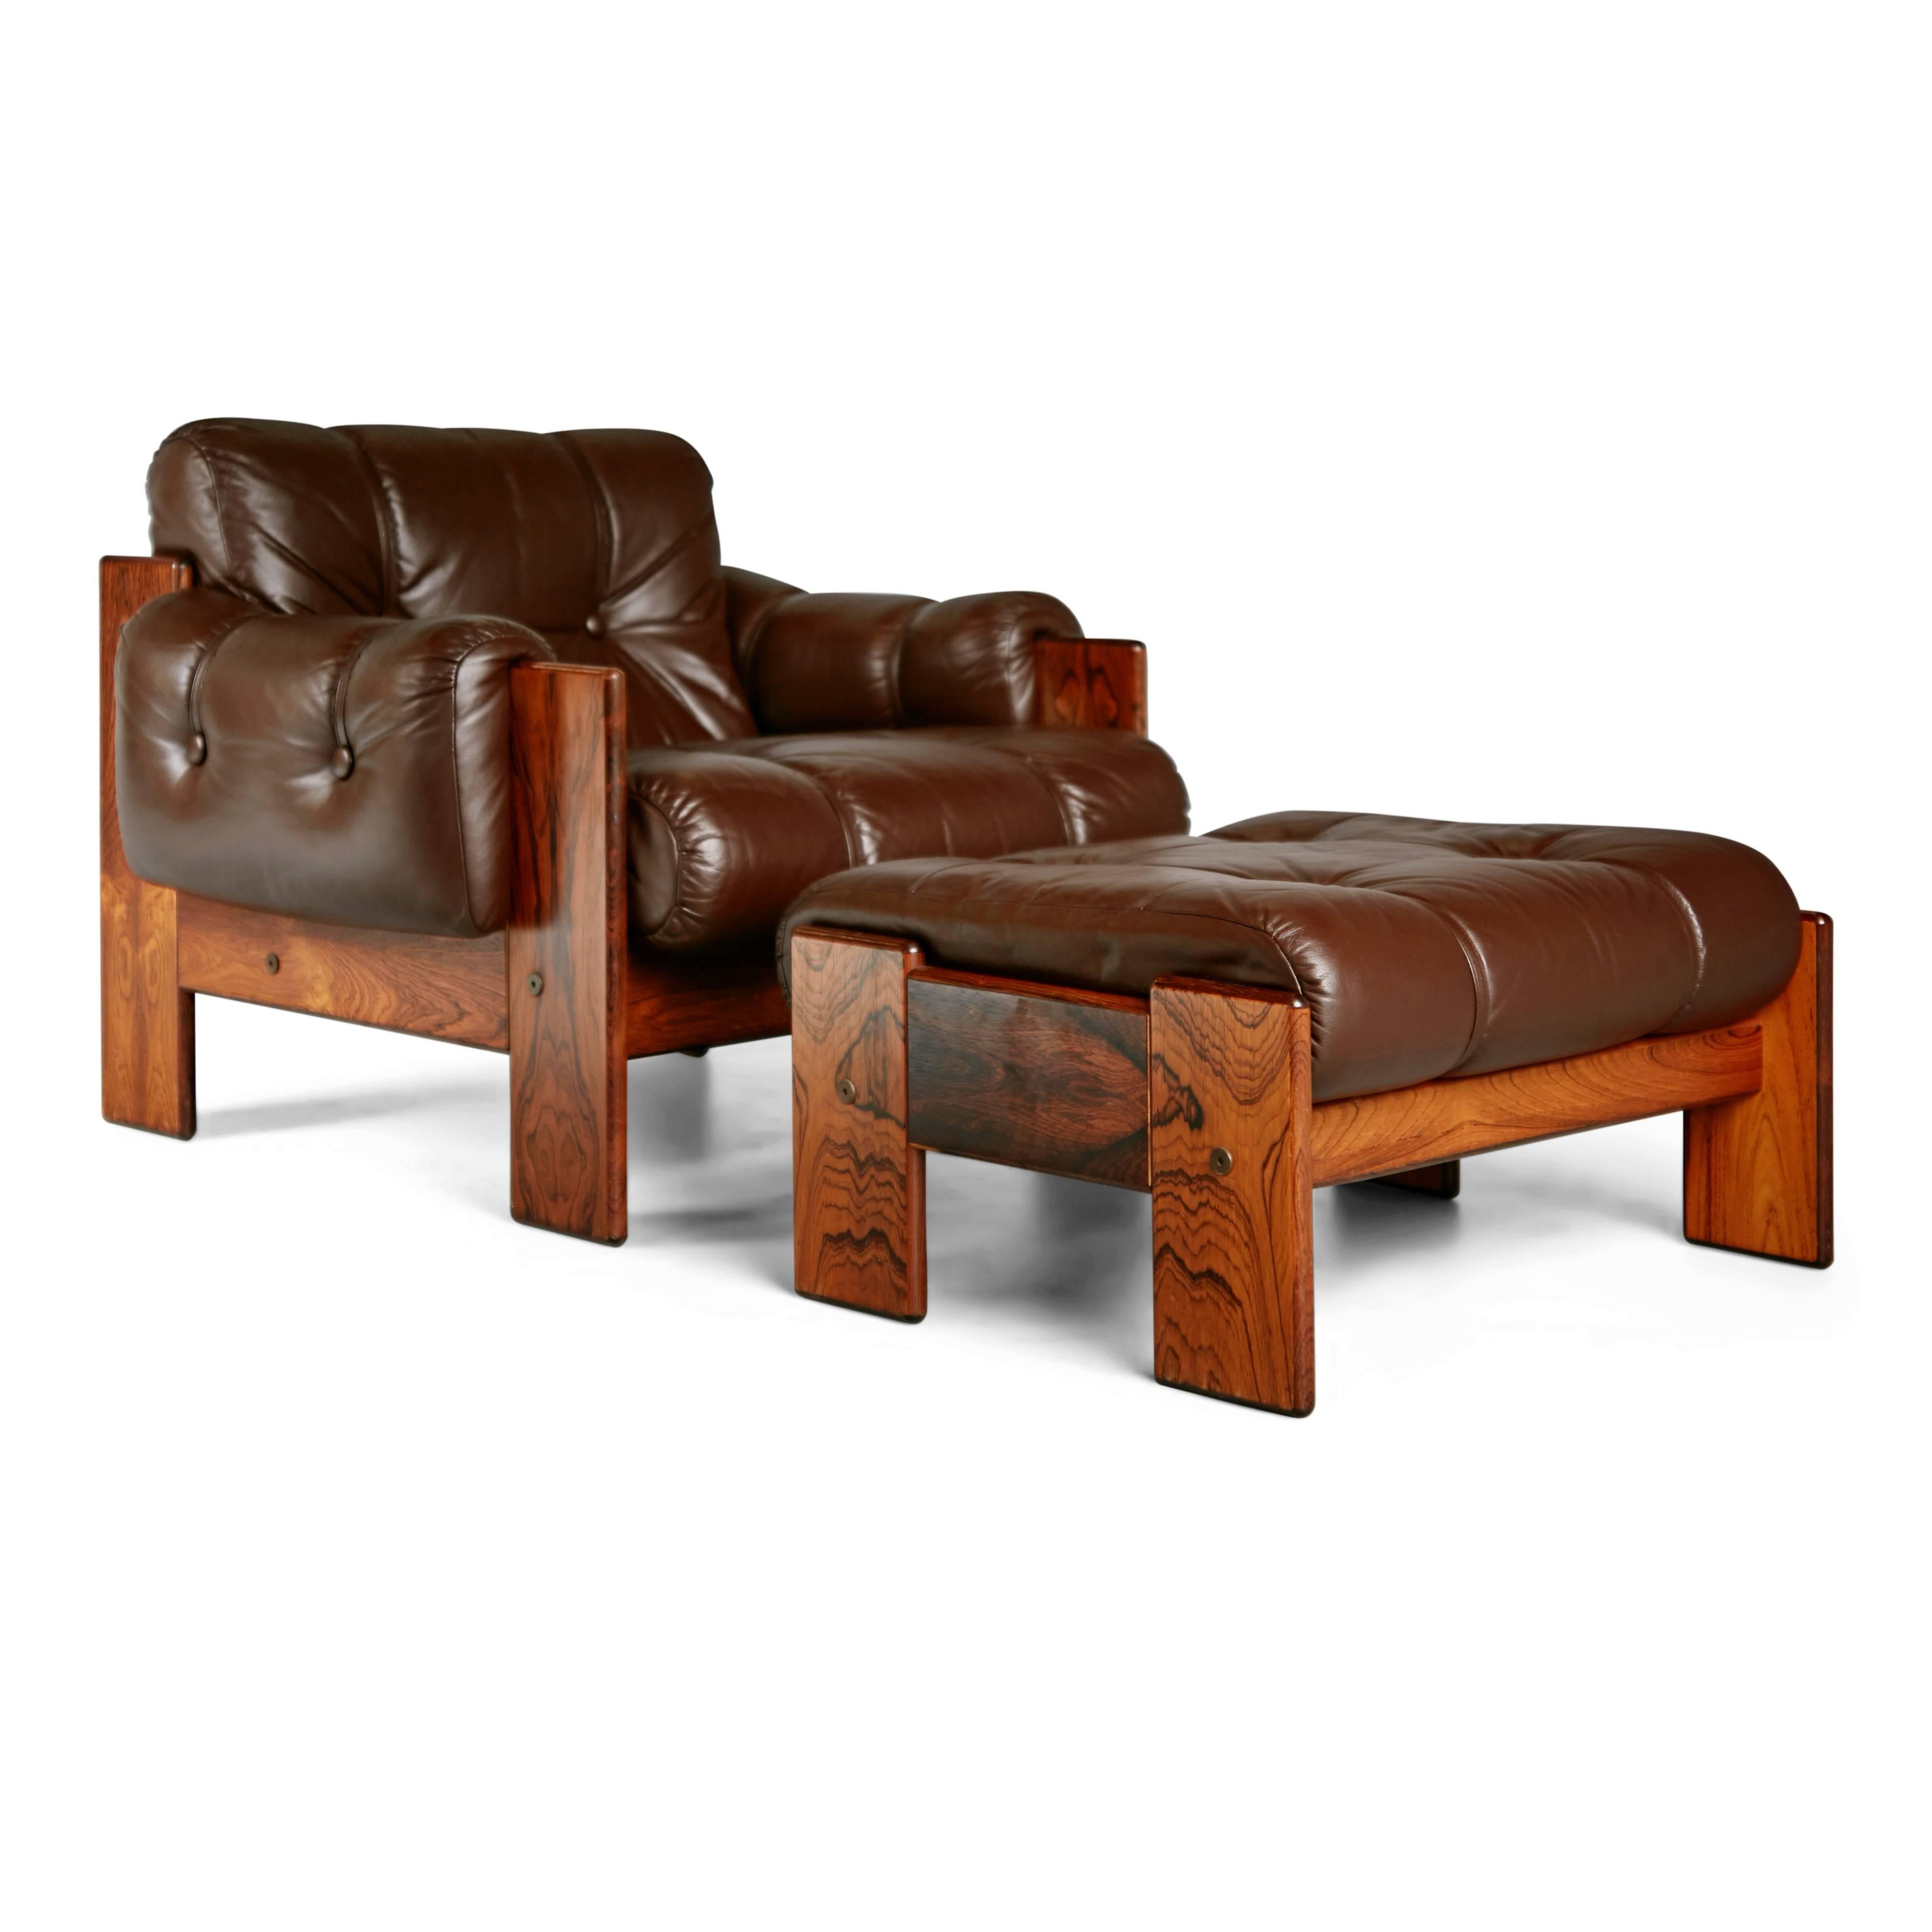 Wonderful lounge chair and matching ottoman by Kalustekiila, Finland. Featuring the original high quality tufted leather upholstery which has expertly cleaned and conditioned to the original rich brown color while still retaining the vibrant look of